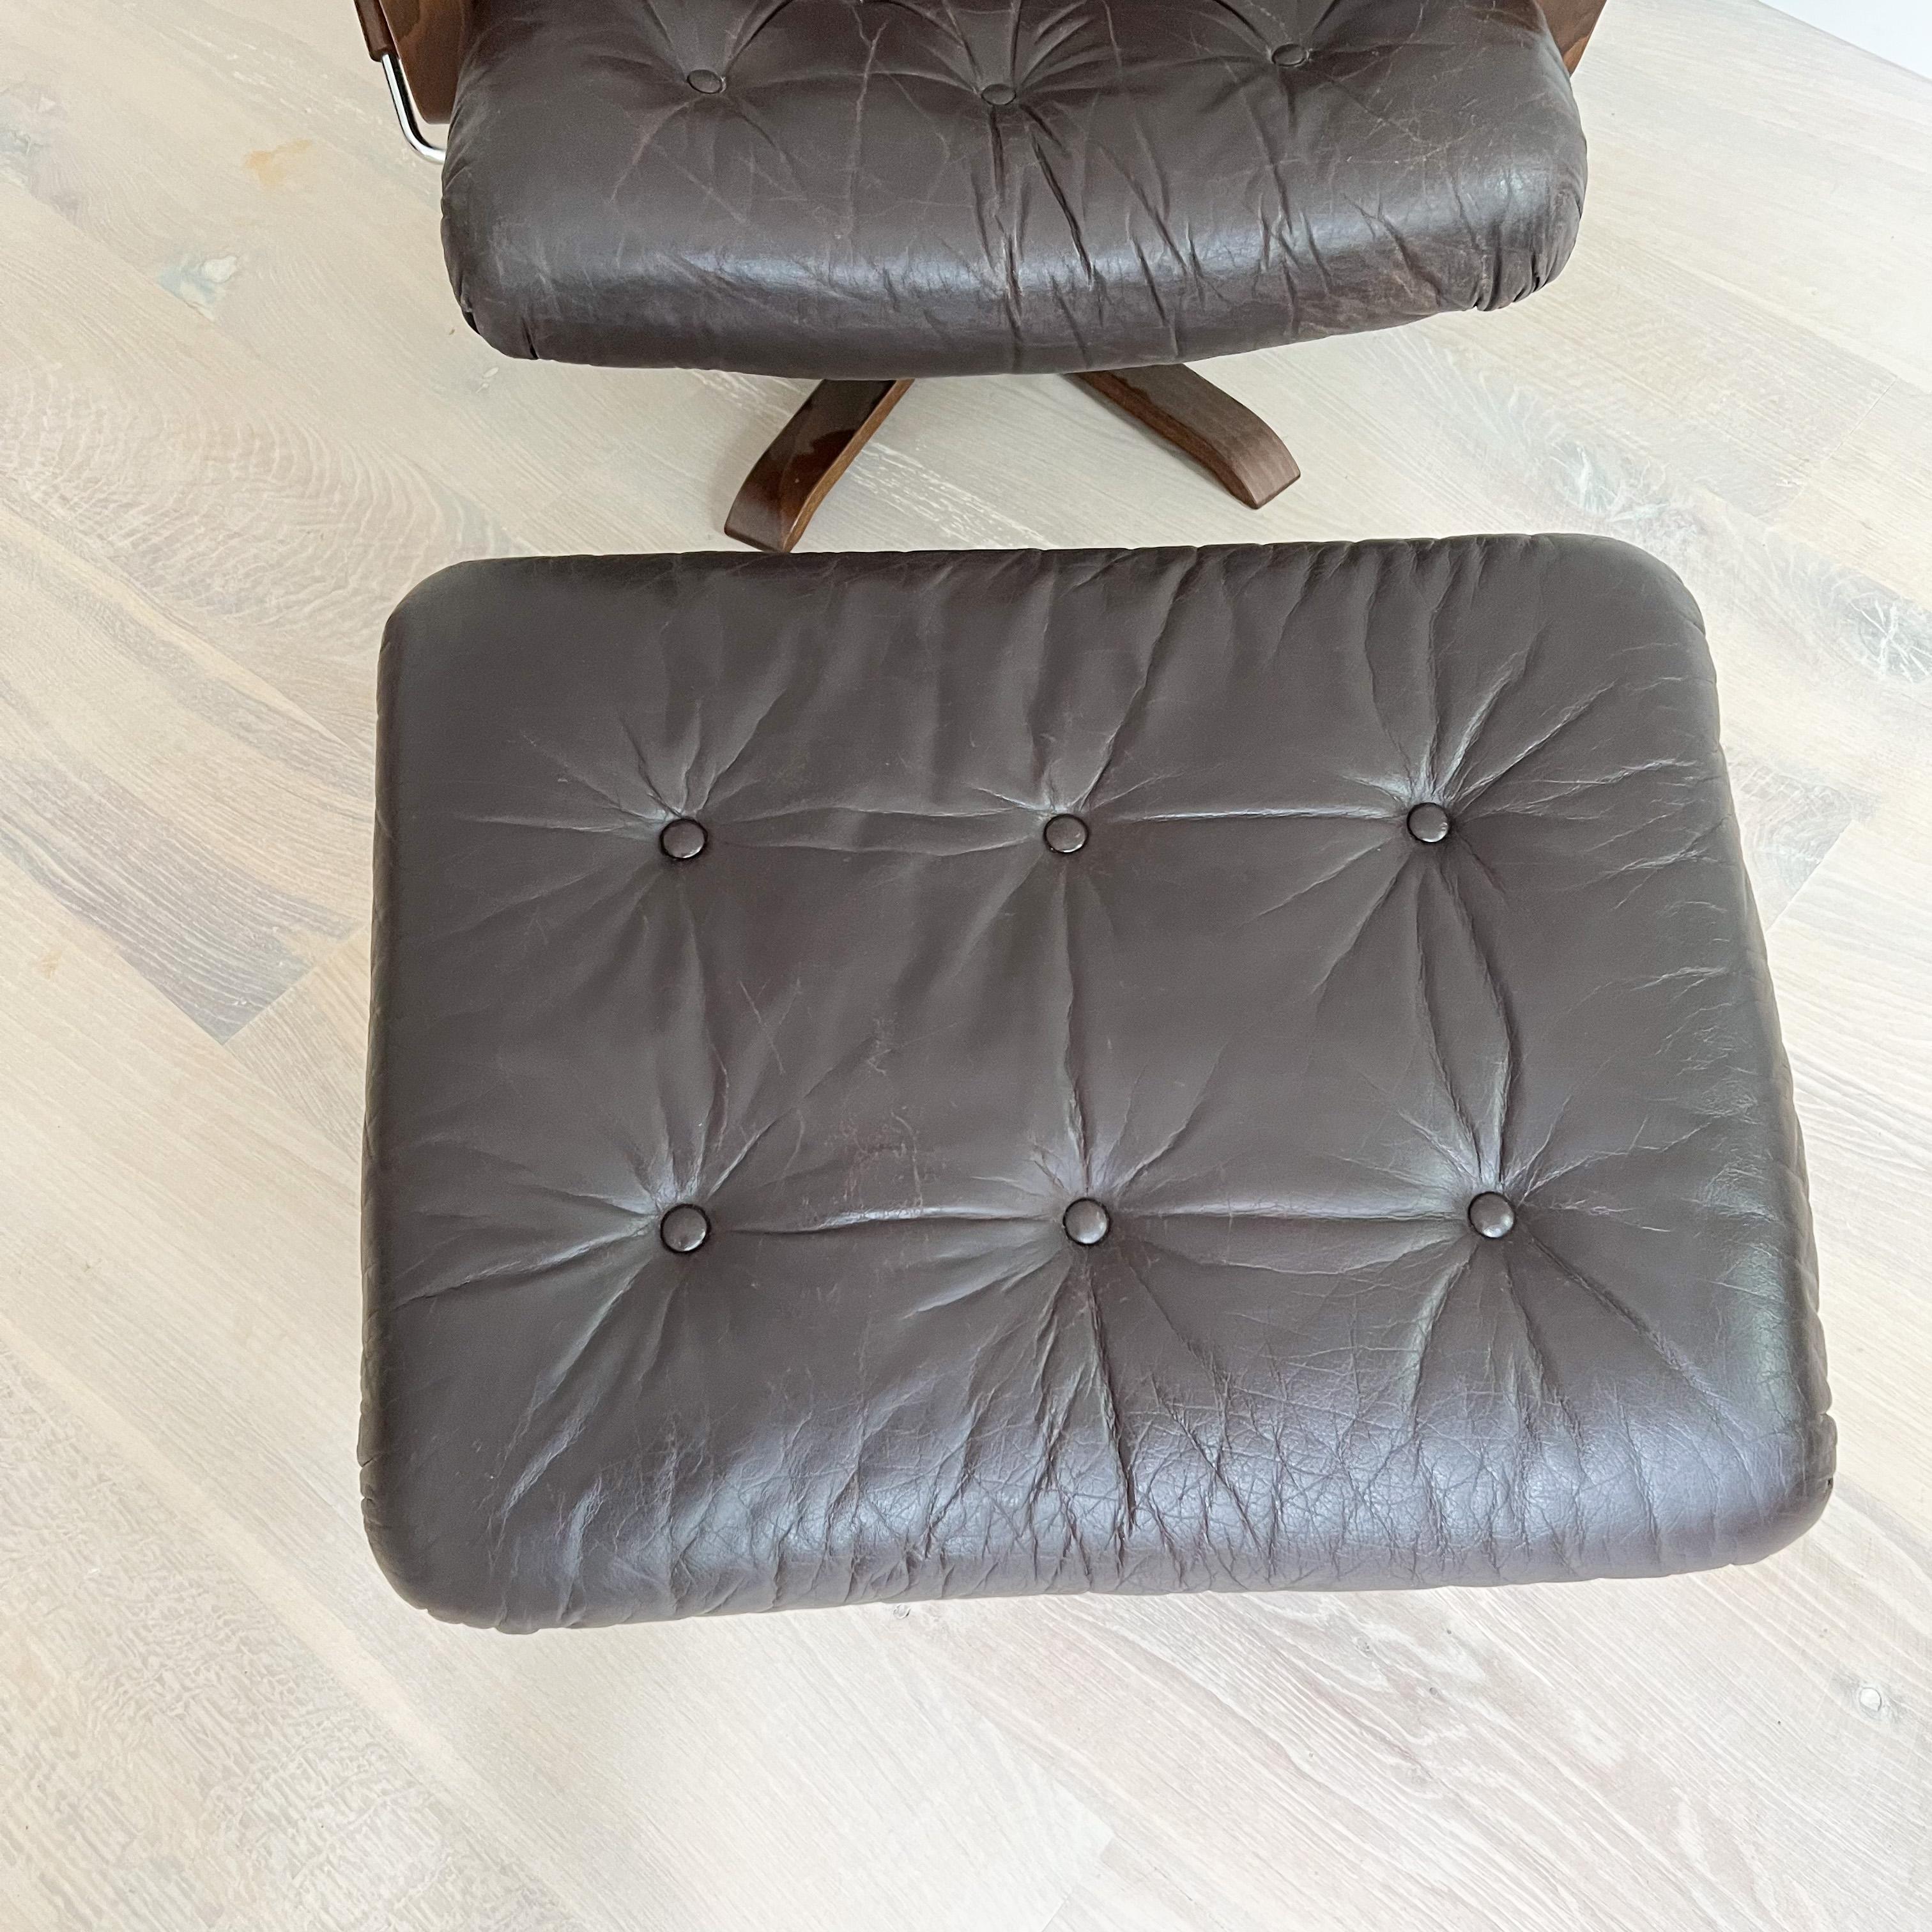 Mid-Century Modern danish lounge chair and ottoman. The original brown leather is in good condition overall - Some light scuffing/scratching to the leather finish and wood frame from age appropriate wear.

The lever on the side doesn’t seem to